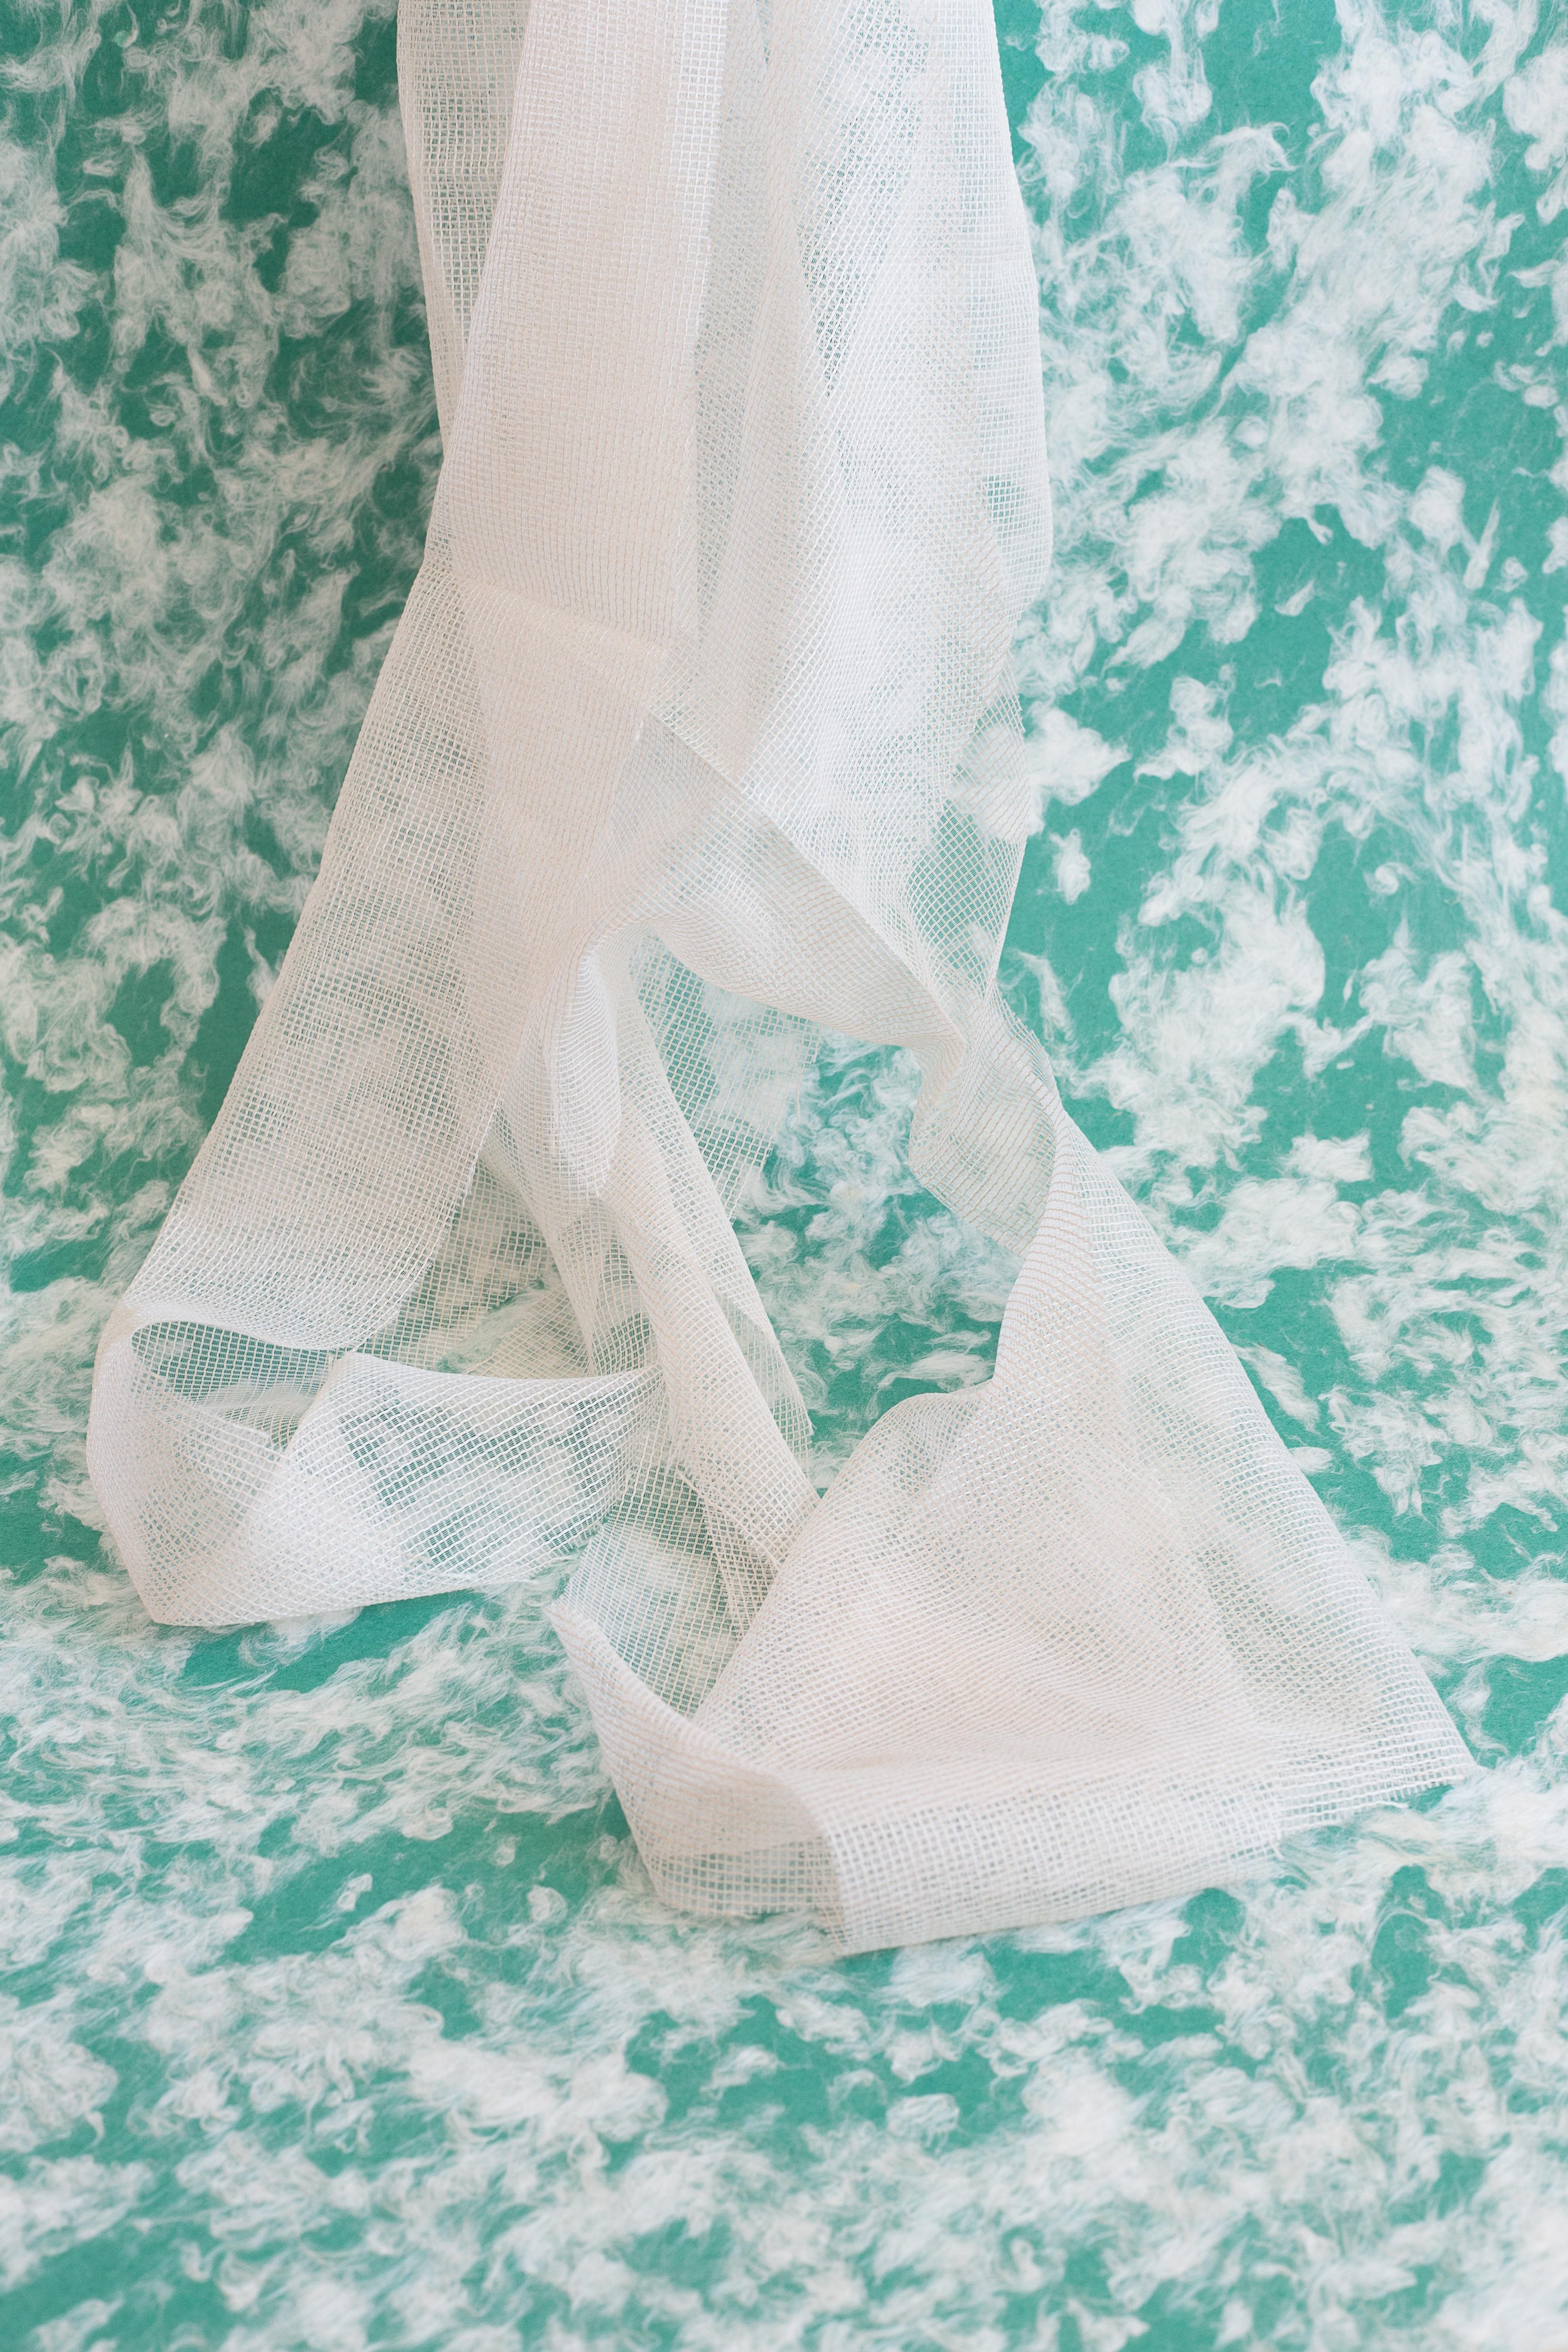 Alison Postma Color Photograph - the precise location (of a place) - Turquoise photo, draped white fabric (12x18)